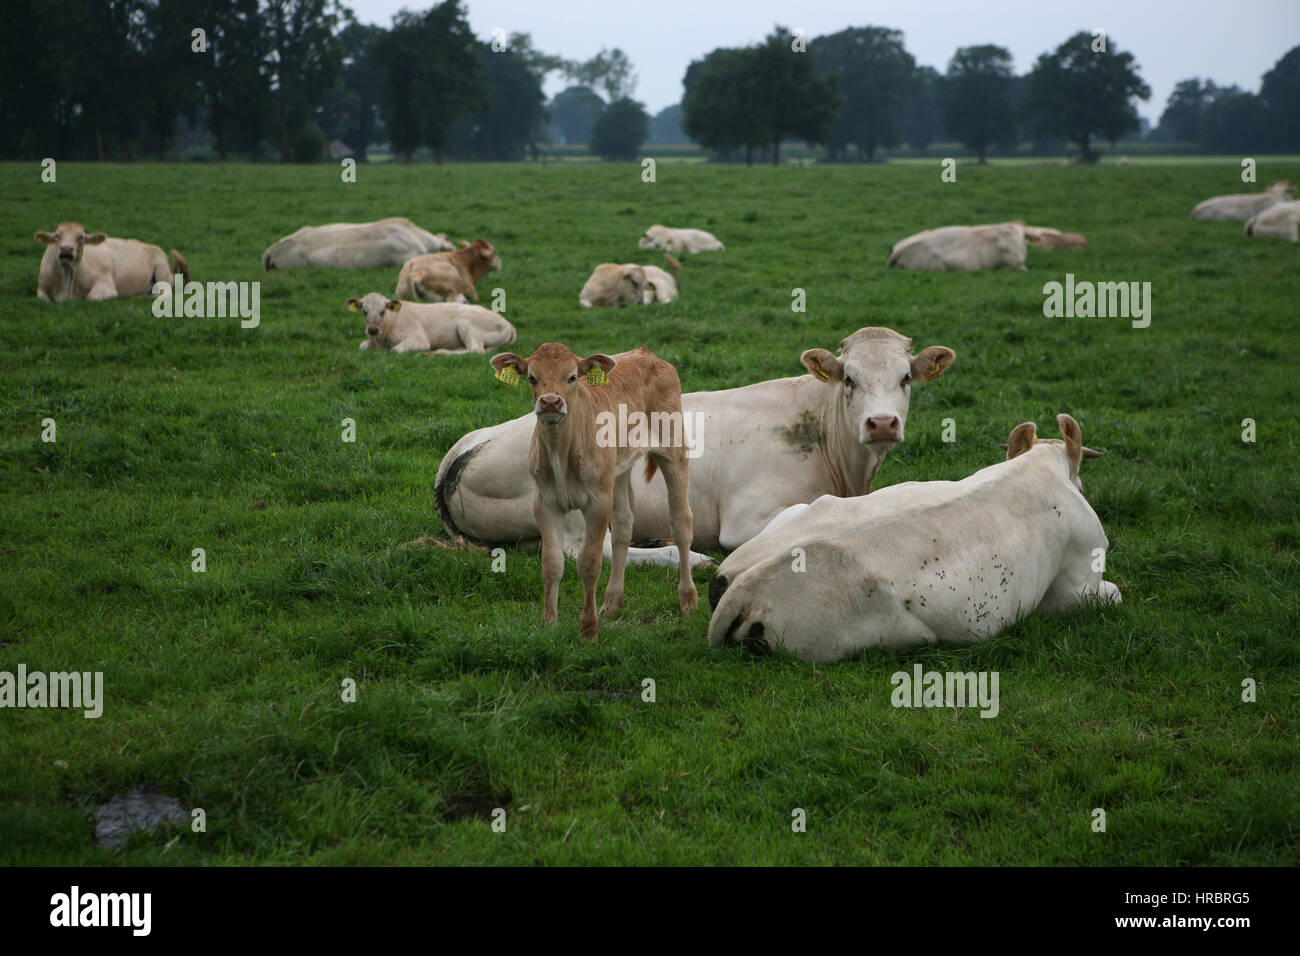 cattle being kept for meat production. Stock Photo